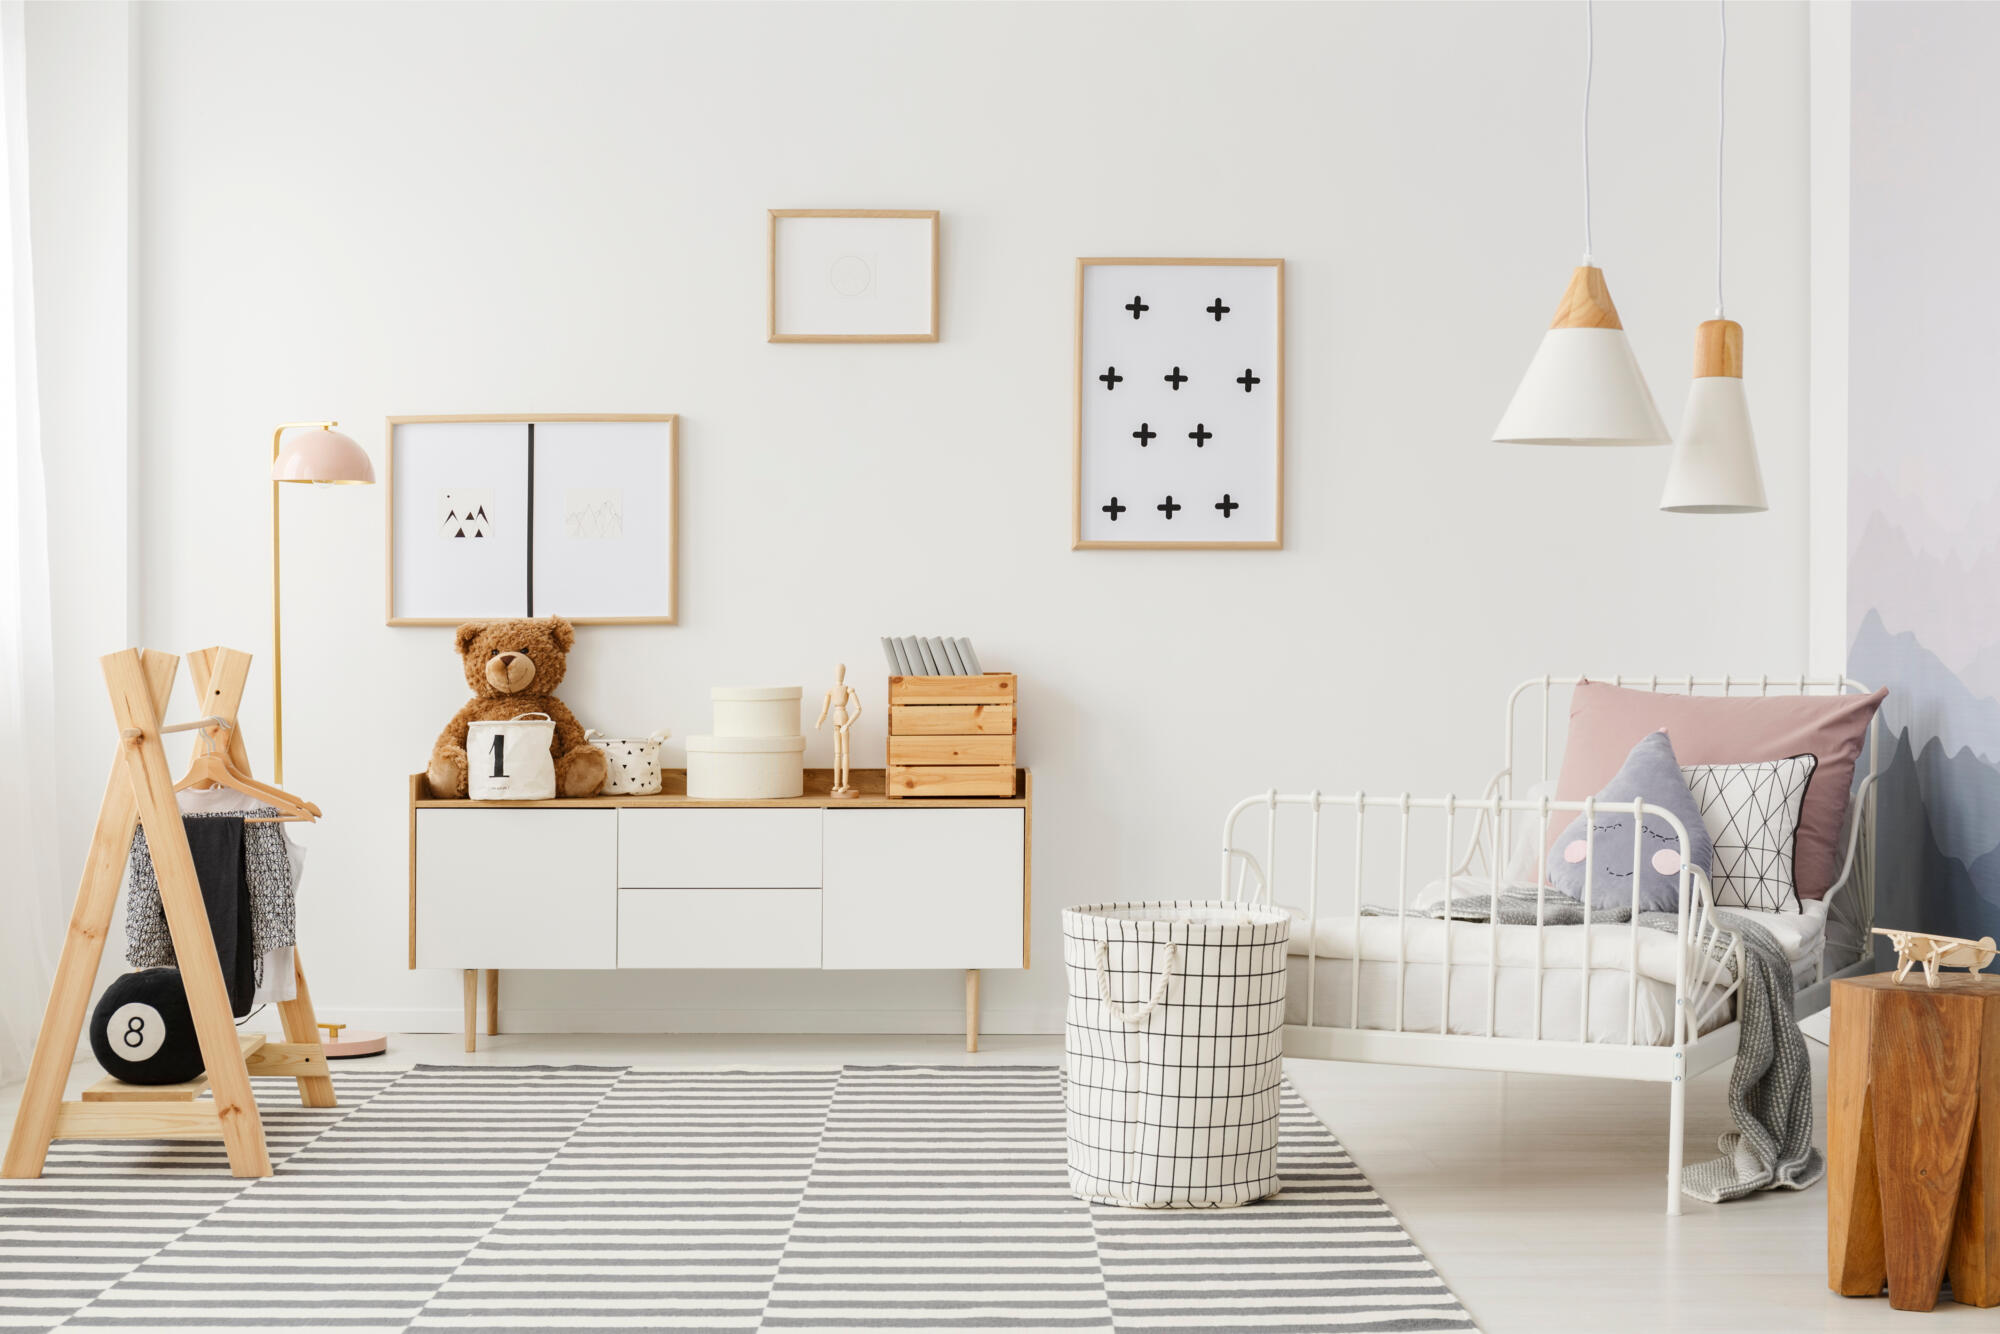 A kids’ bedroom with white furniture and a teddy bear.